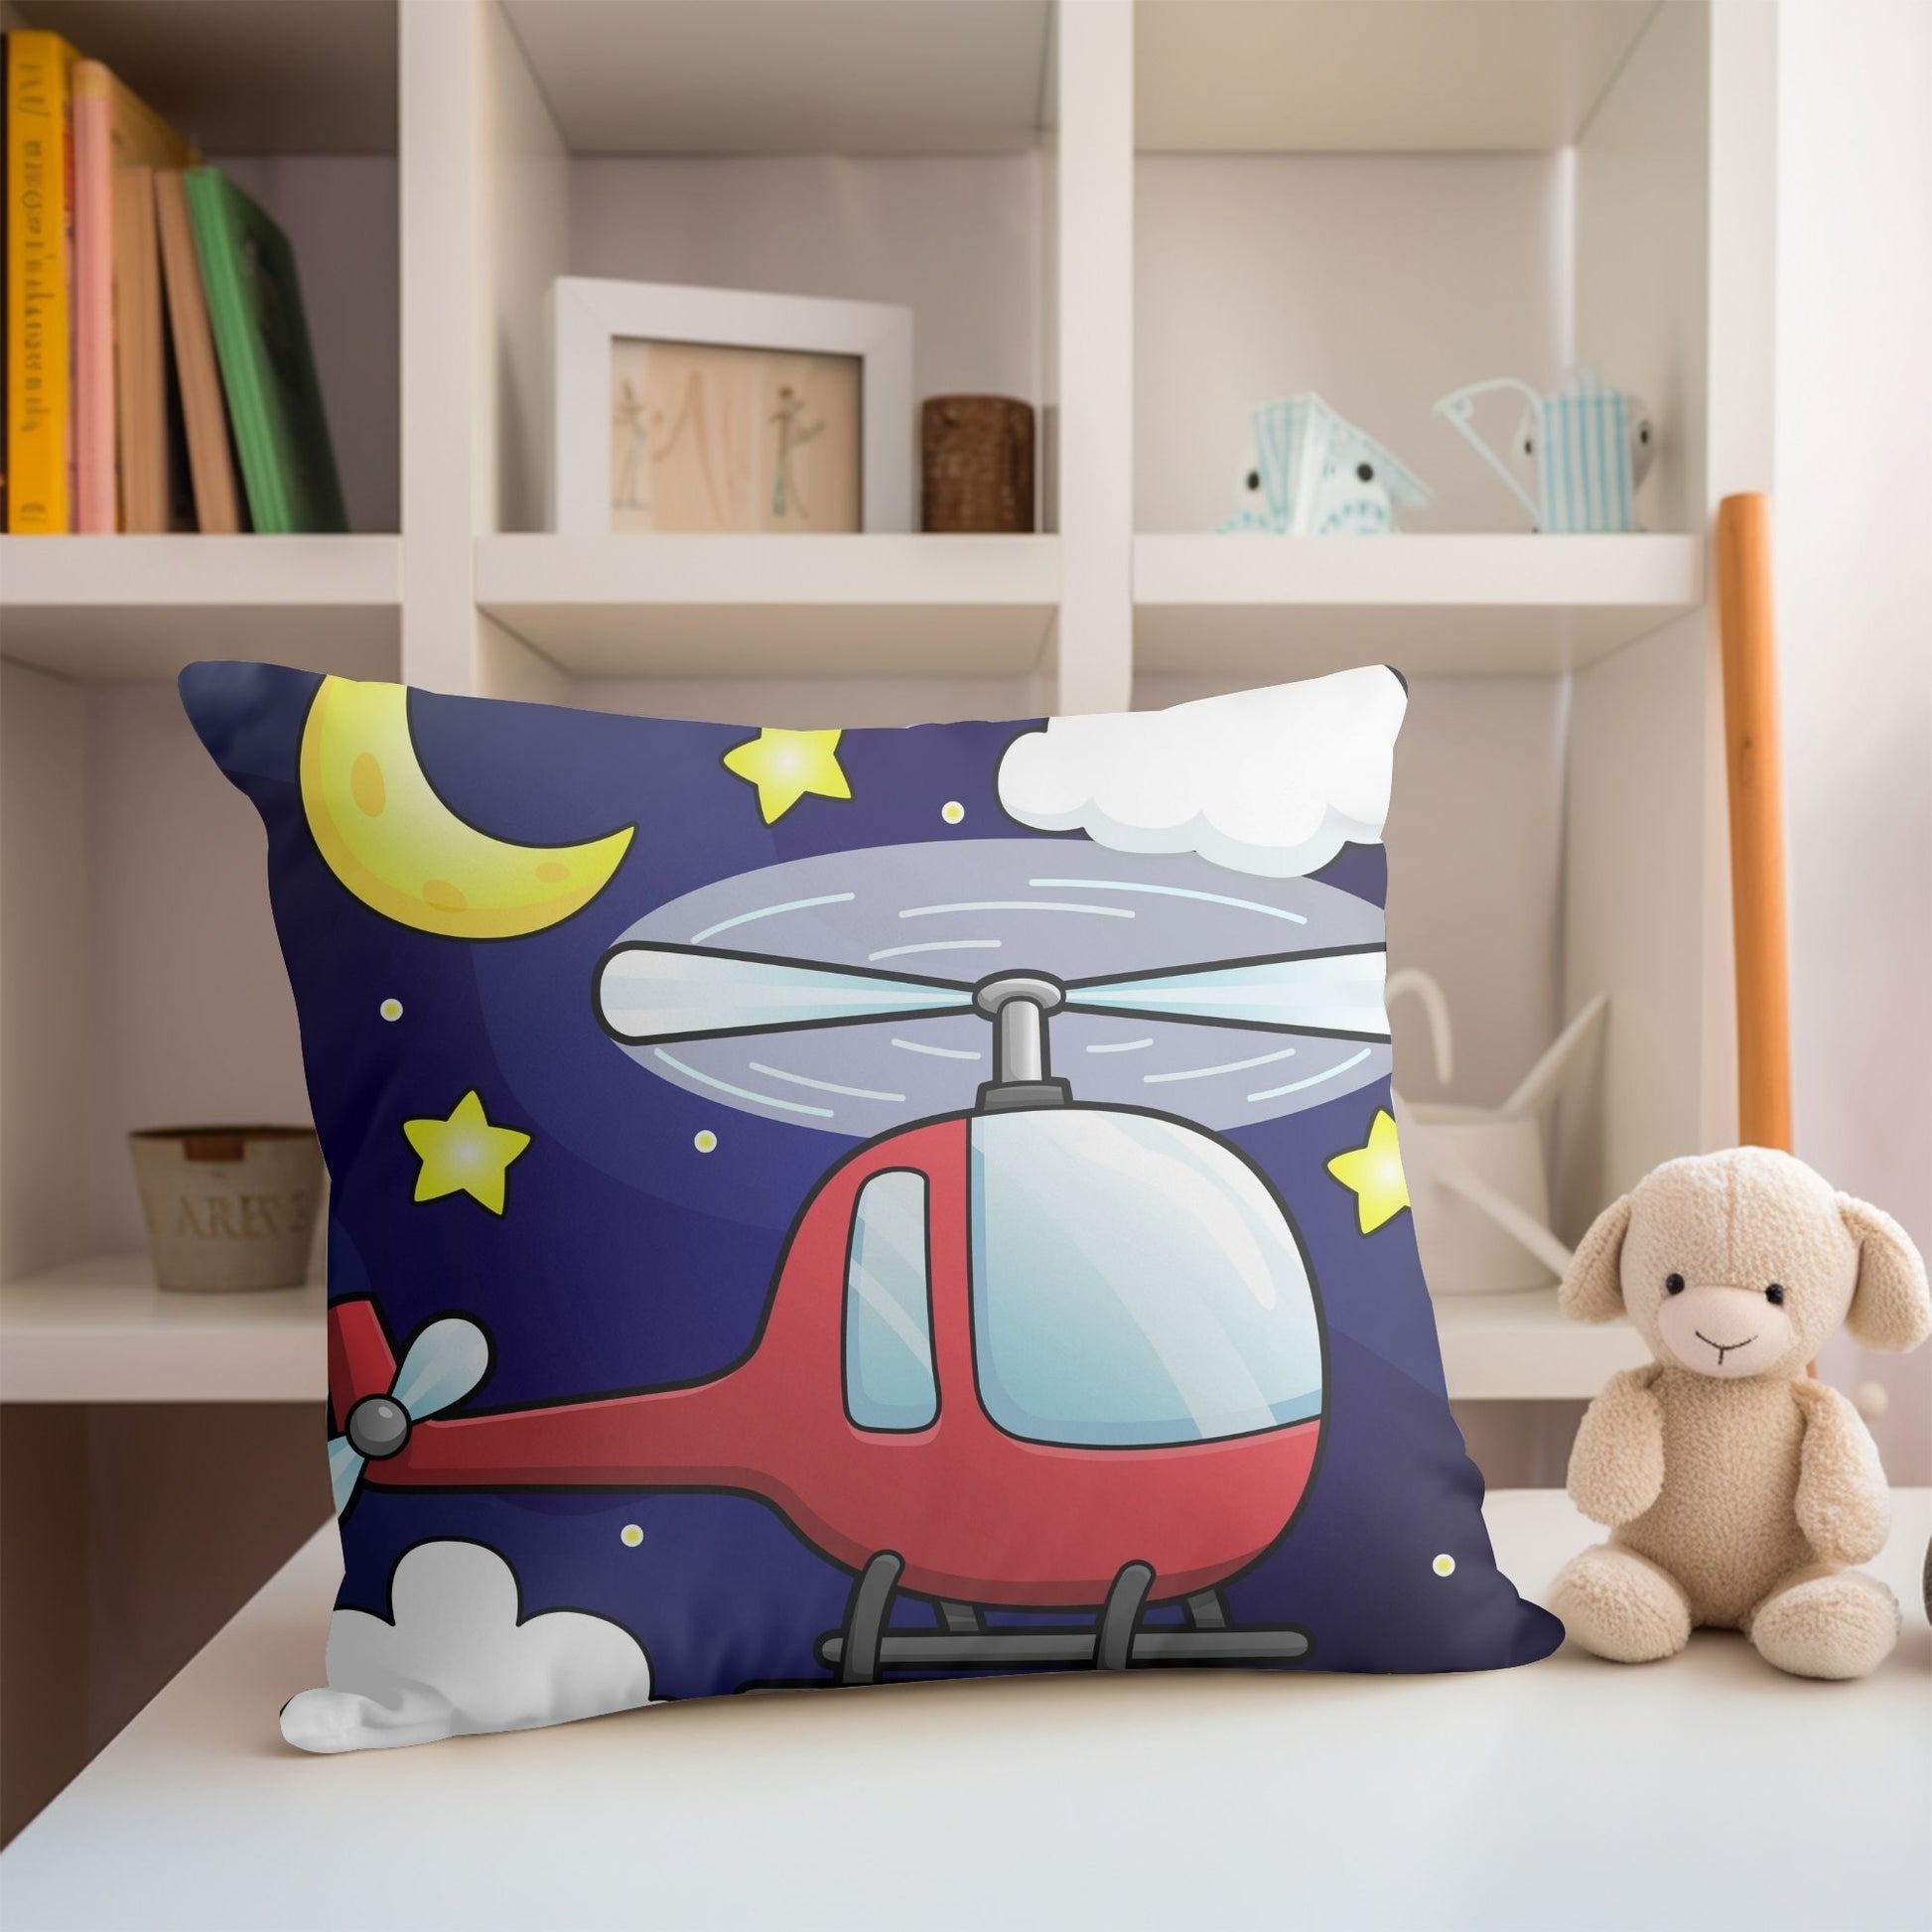 Charming kids pillow adorned with a red helicopter design for aviation enthusiasts.